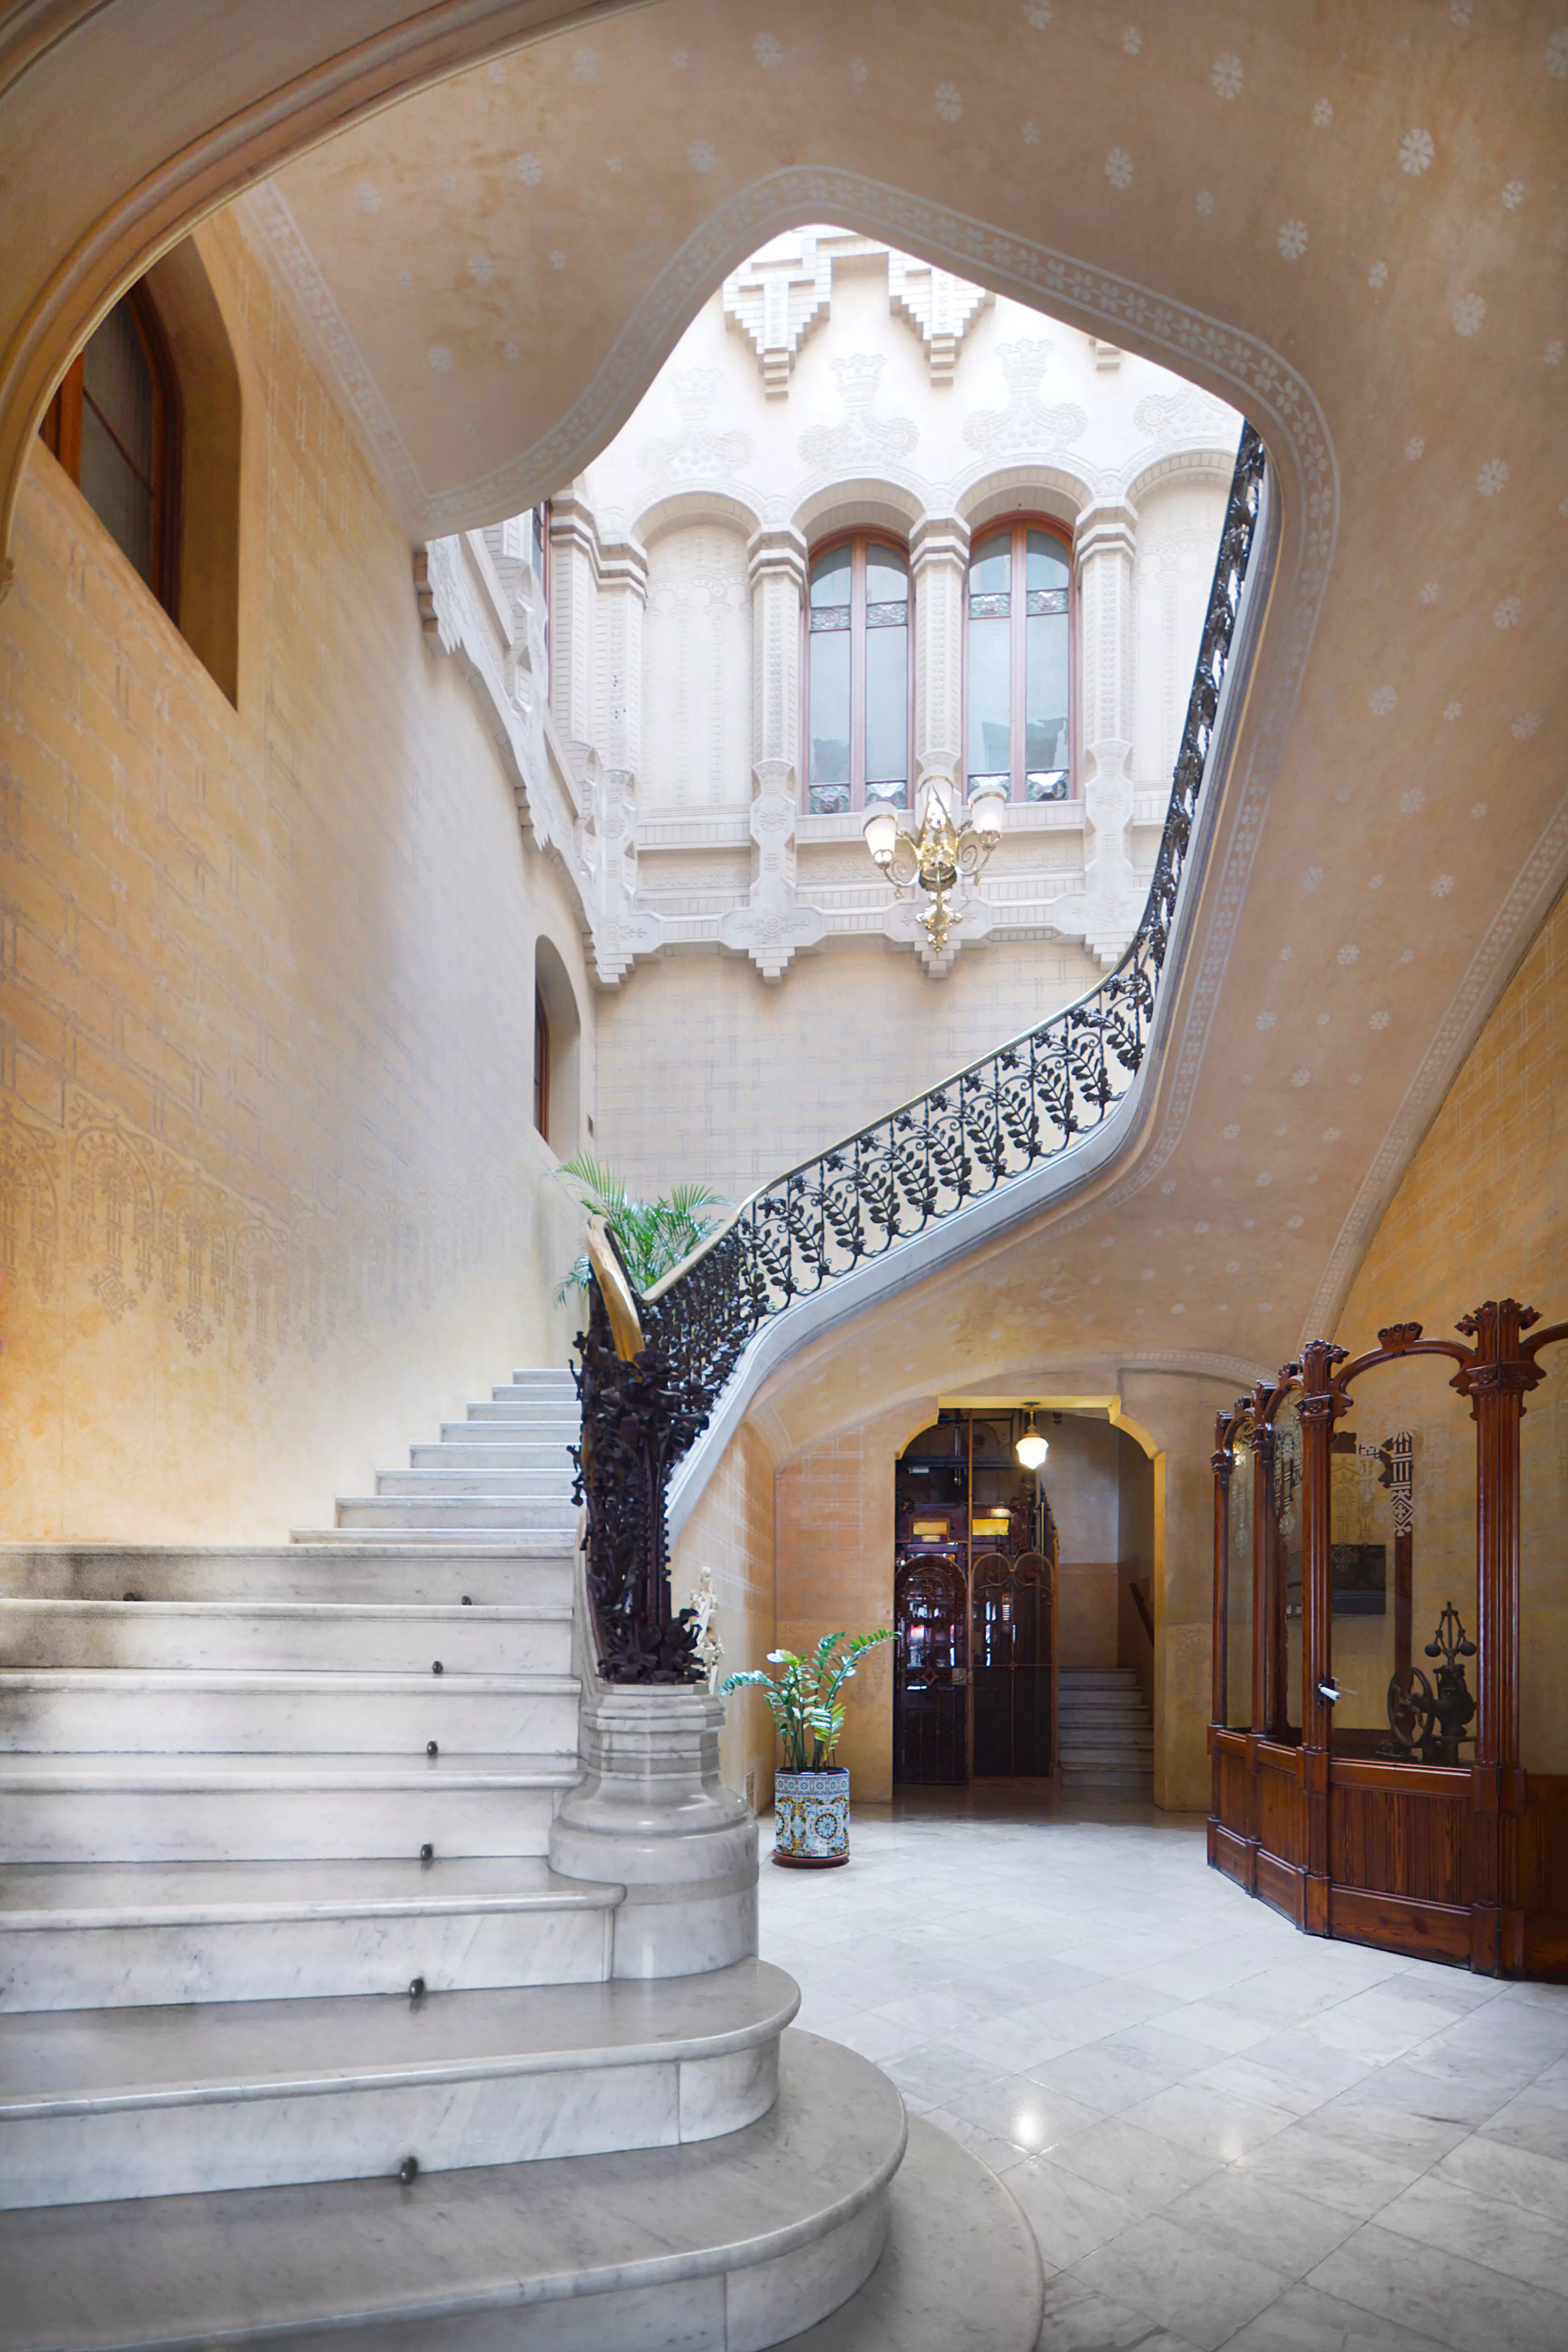 Just look at this grand staircase! (